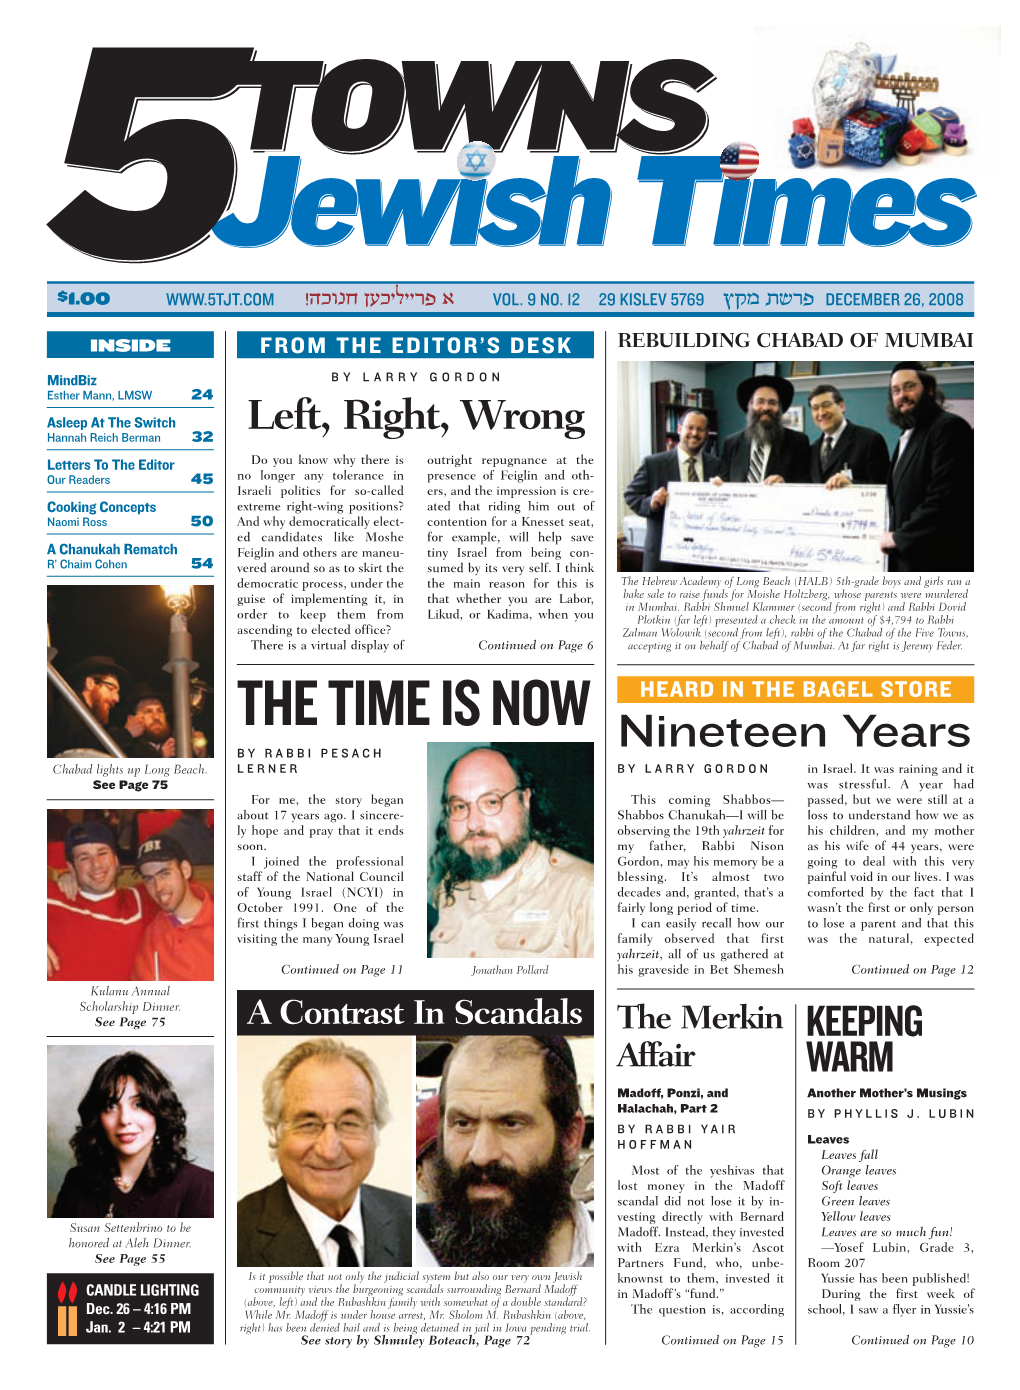 The 5 Towns Jewish Times! You Can Upload Your Digital Photos and See Them Printed in the Weekly Edition of the 5 Towns Jewish Times